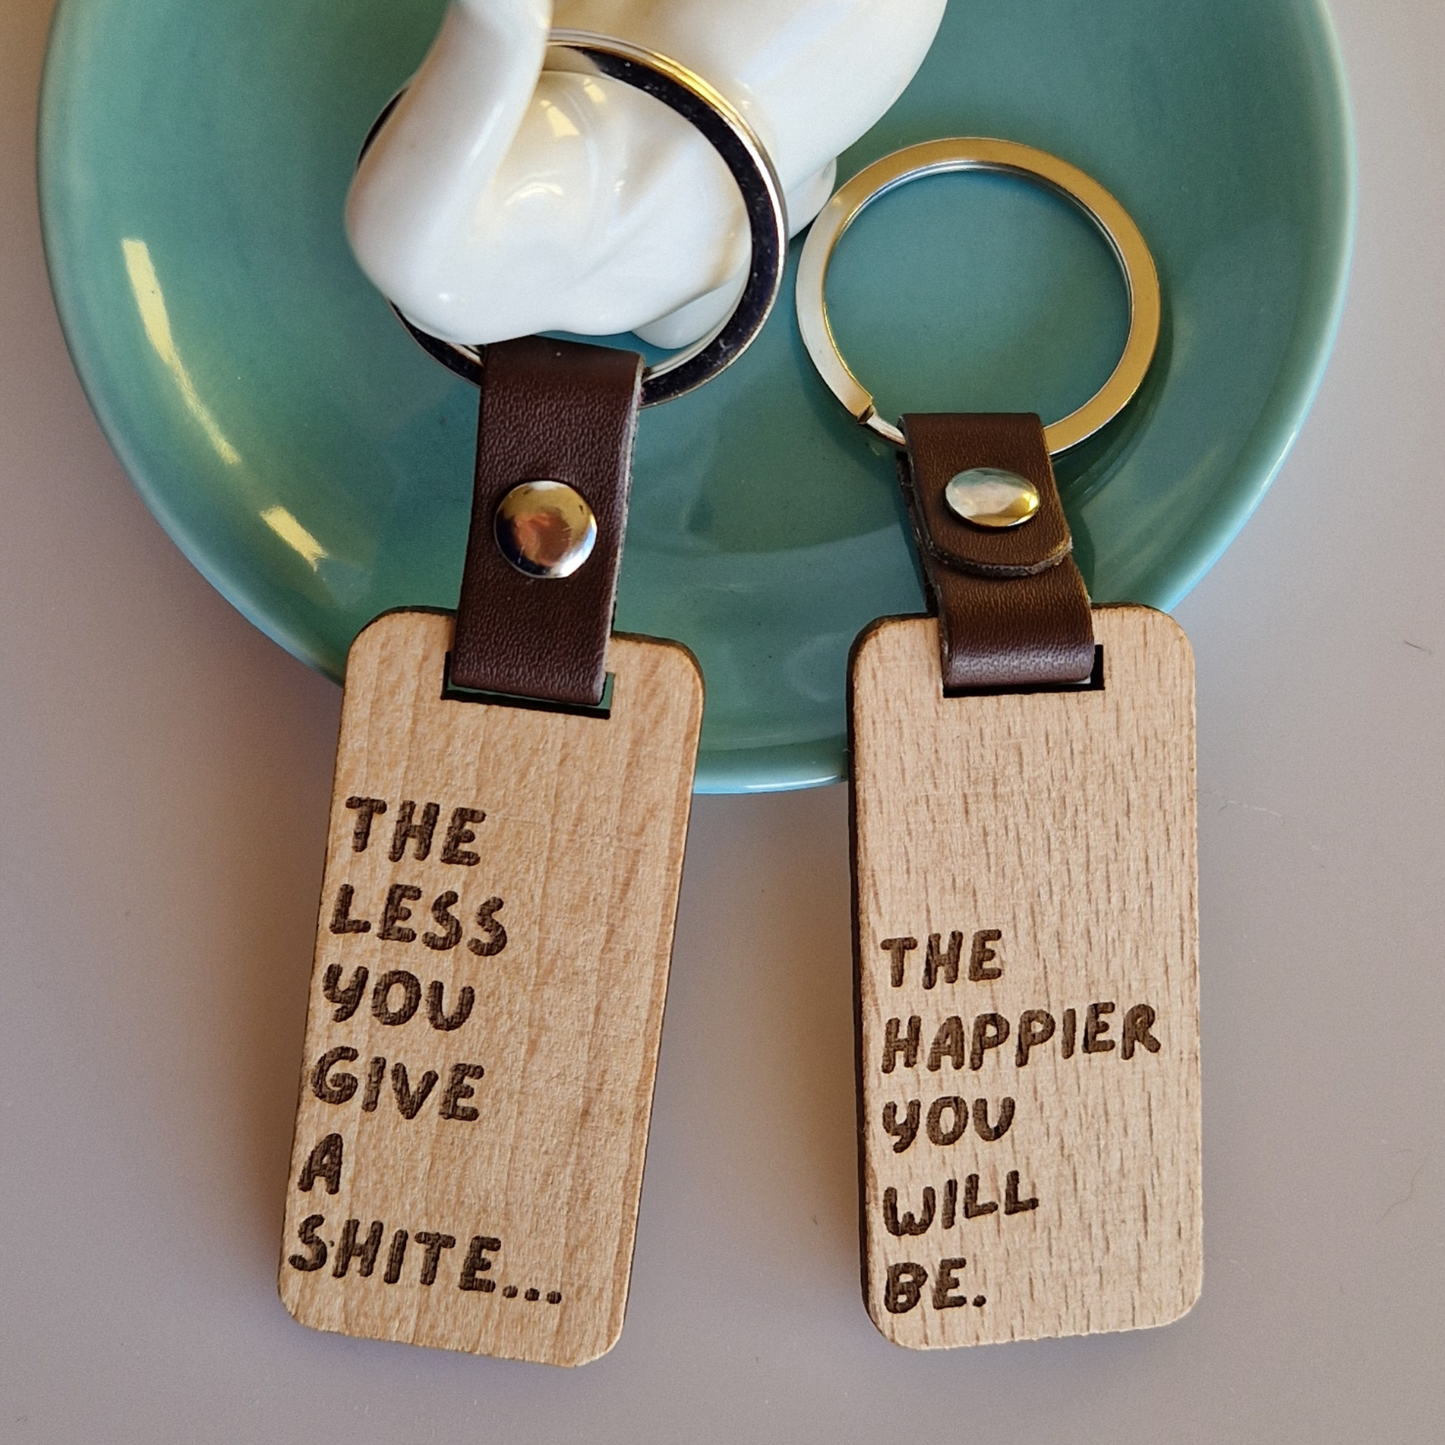 THE LESS YOU GIVE A SHITE KEYRING